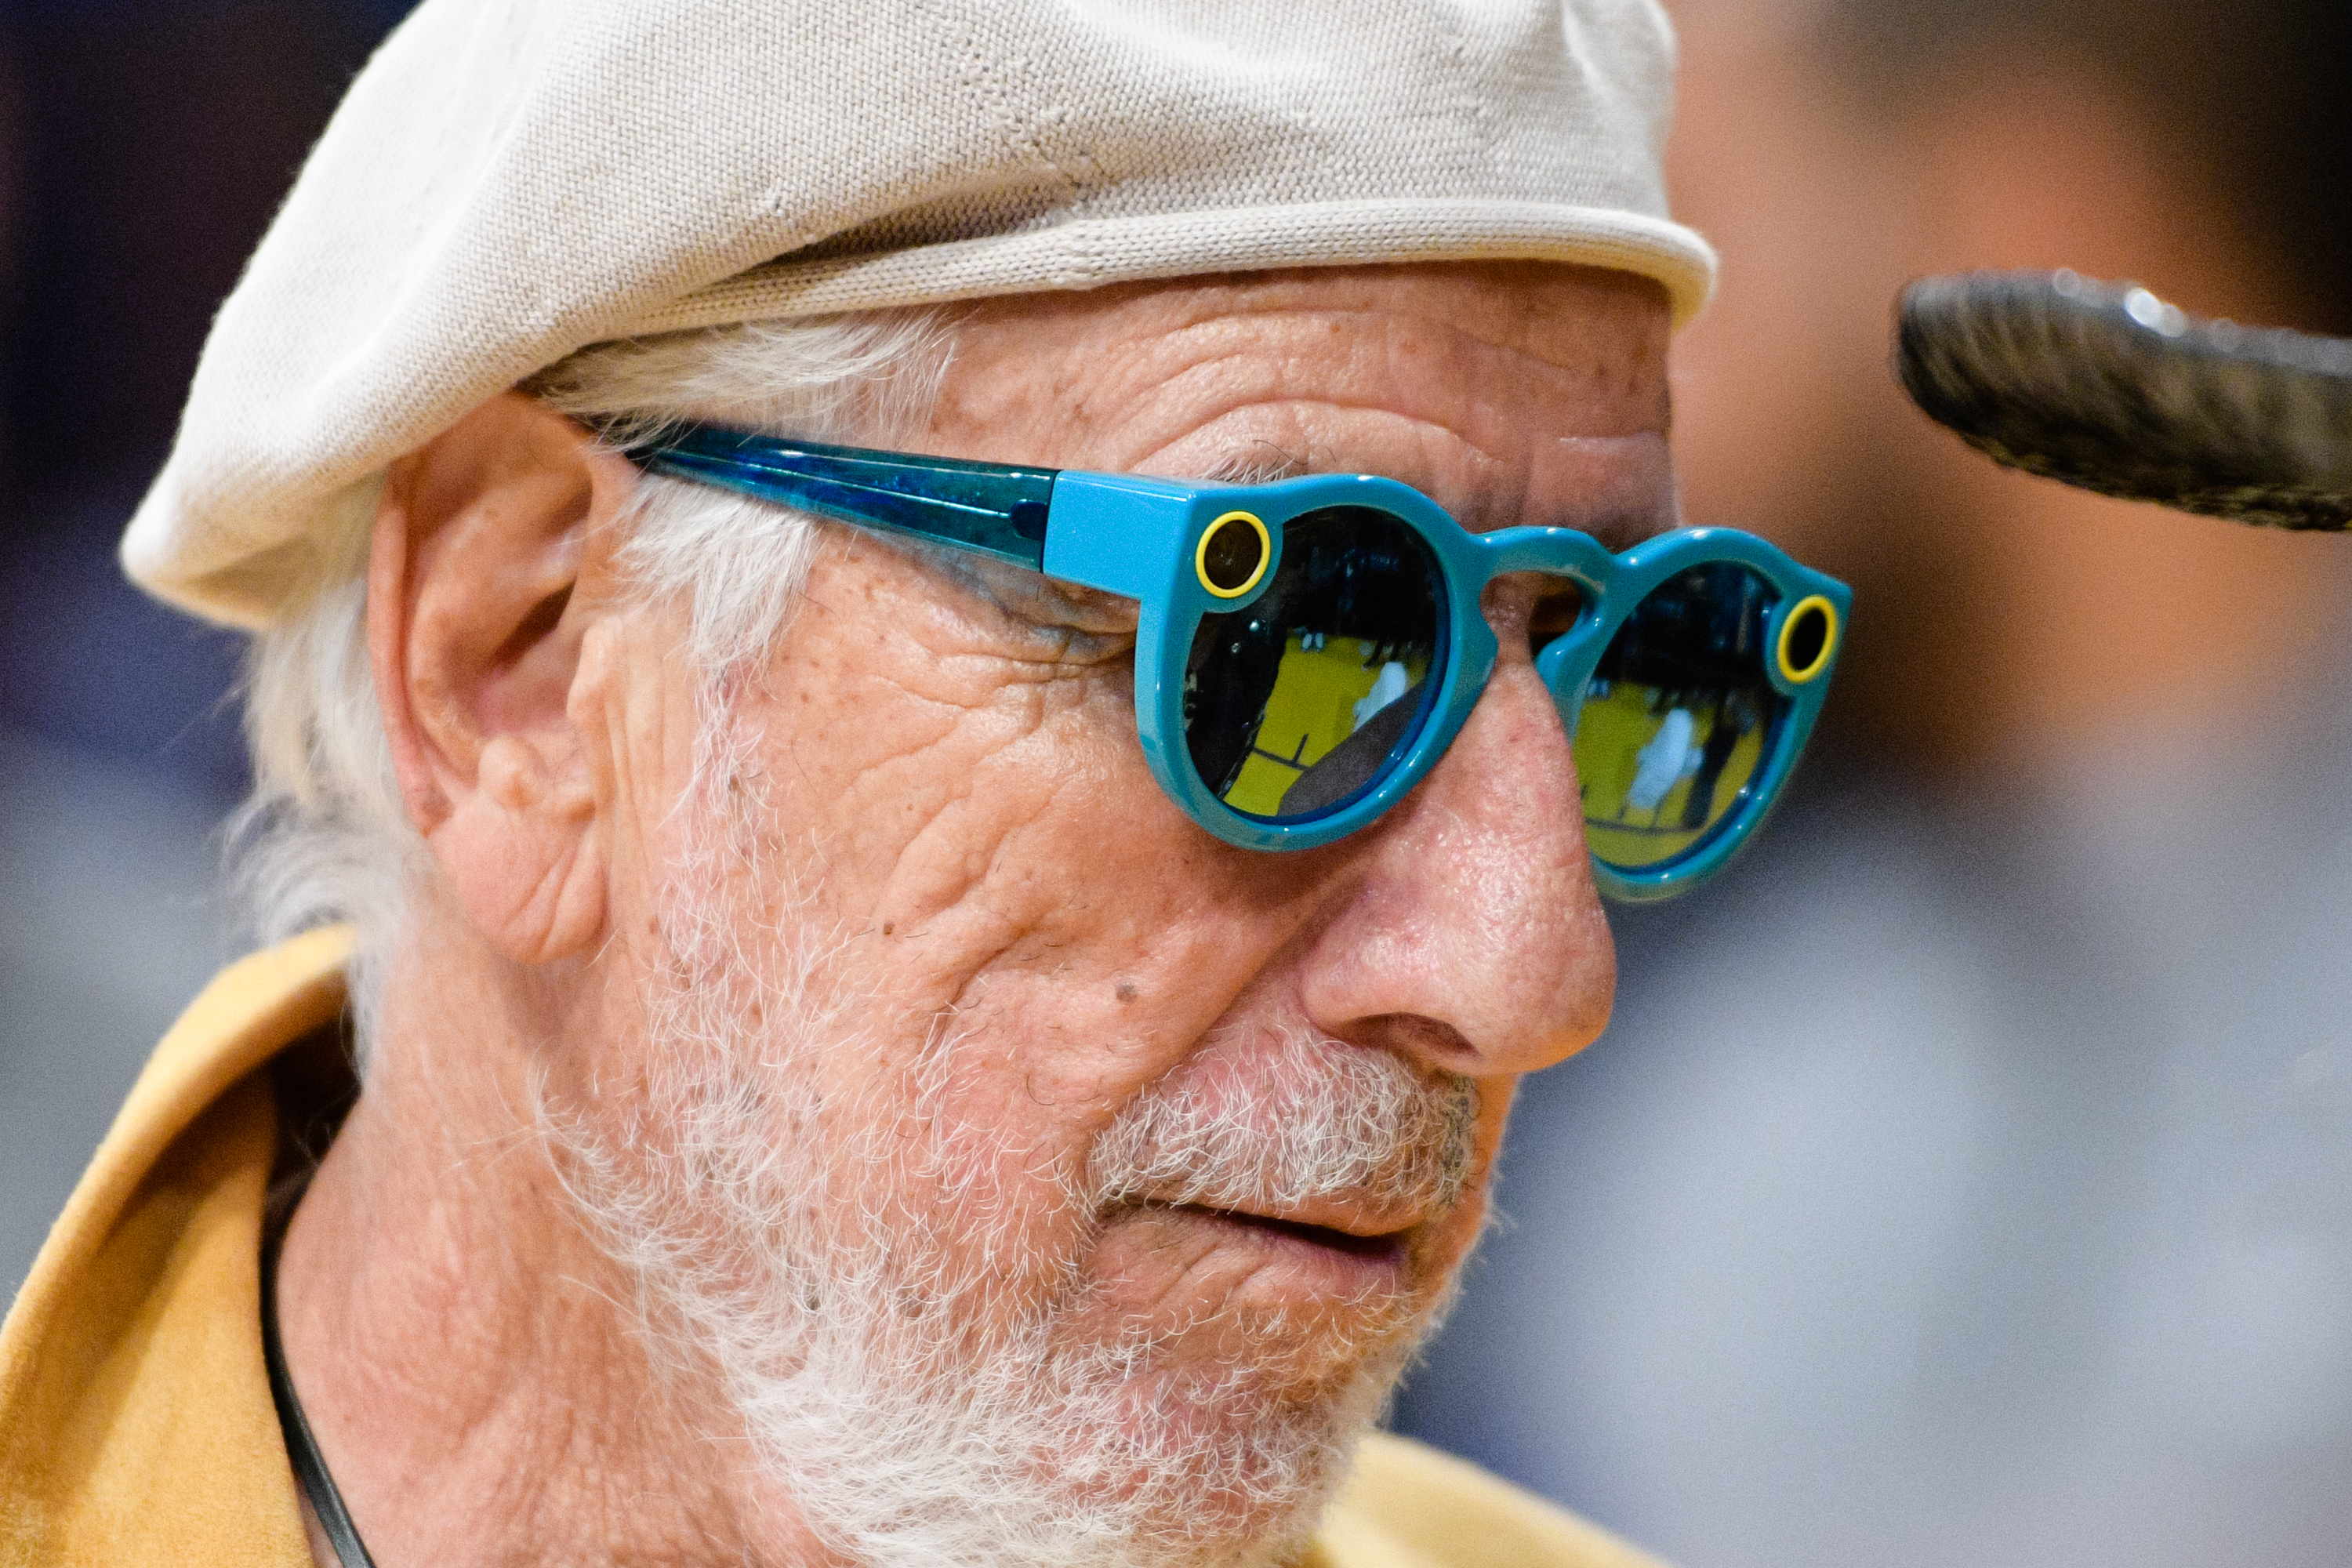 Lou Adler, wearing Snapchat's Spectacles, attends a basketball game between the Brooklyn Nets and the Los Angeles Lakers at Staples Center on November 15, 2016 in Los Angeles, California. (Noel Vasquez—Getty Images,)